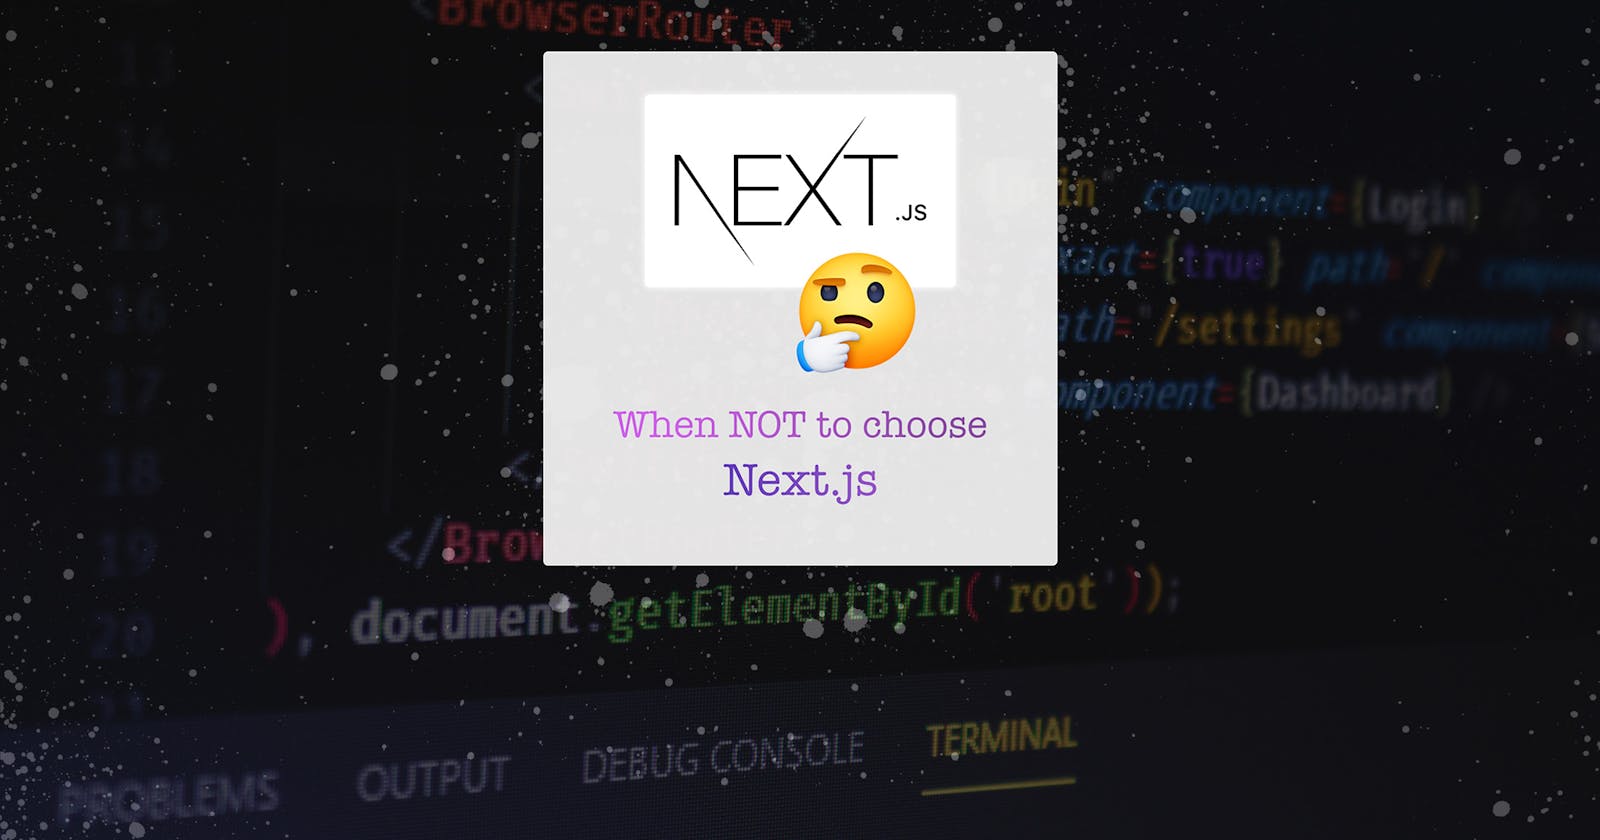 When NOT to choose Next.js